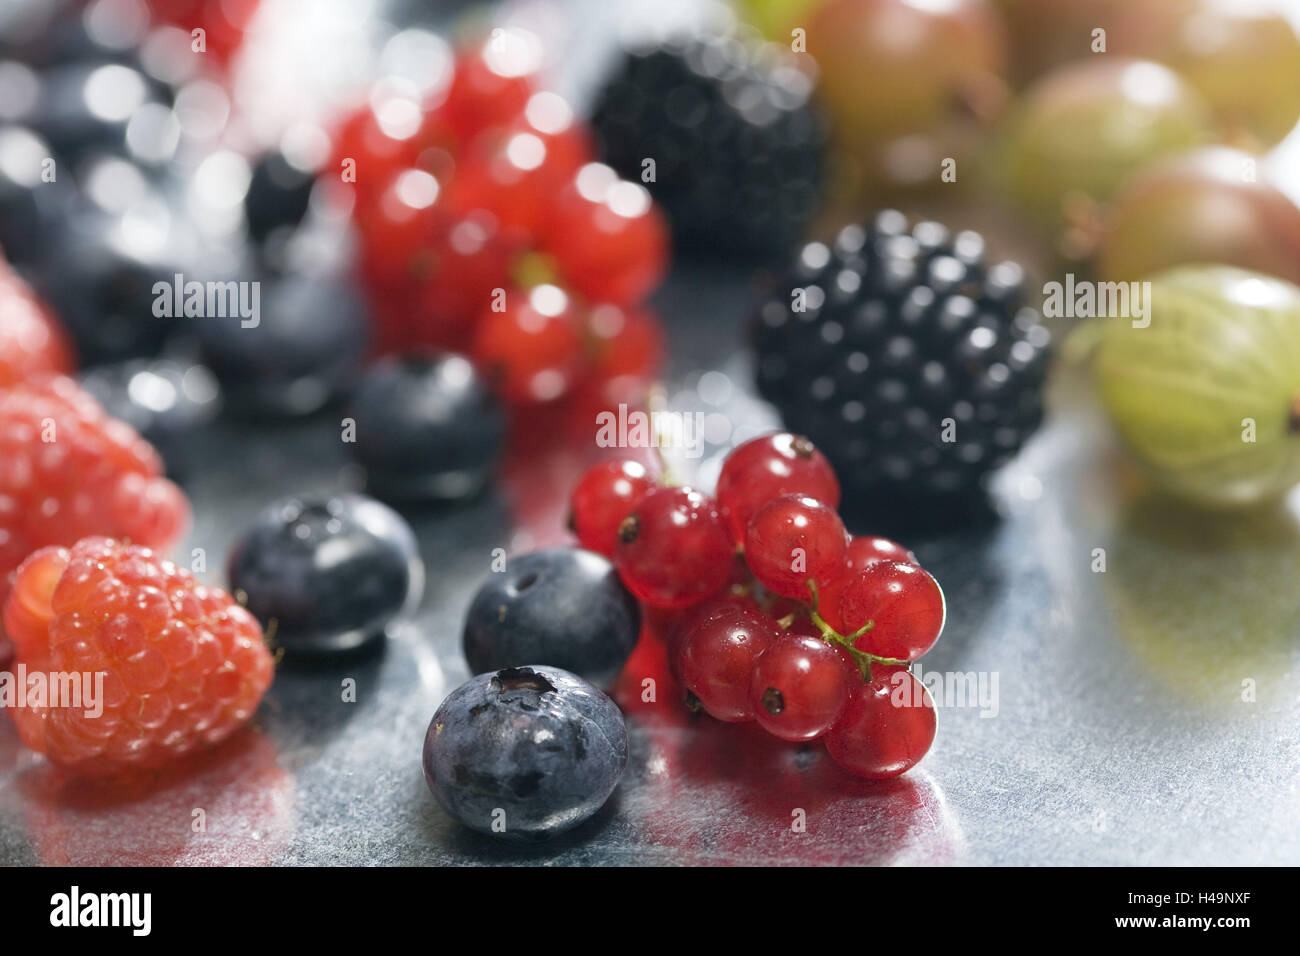 Bilberries, red currants, raspberries, gooseberries, blackberries, close up, Food, fruits, berries, eatable, blue-black, darkly, red, light-red, green, many, fragrantly, product photography, studio, summer fruit, soft fruits, berries, vitamins, rich in vitamins, differently, passed away, blur, Stock Photo